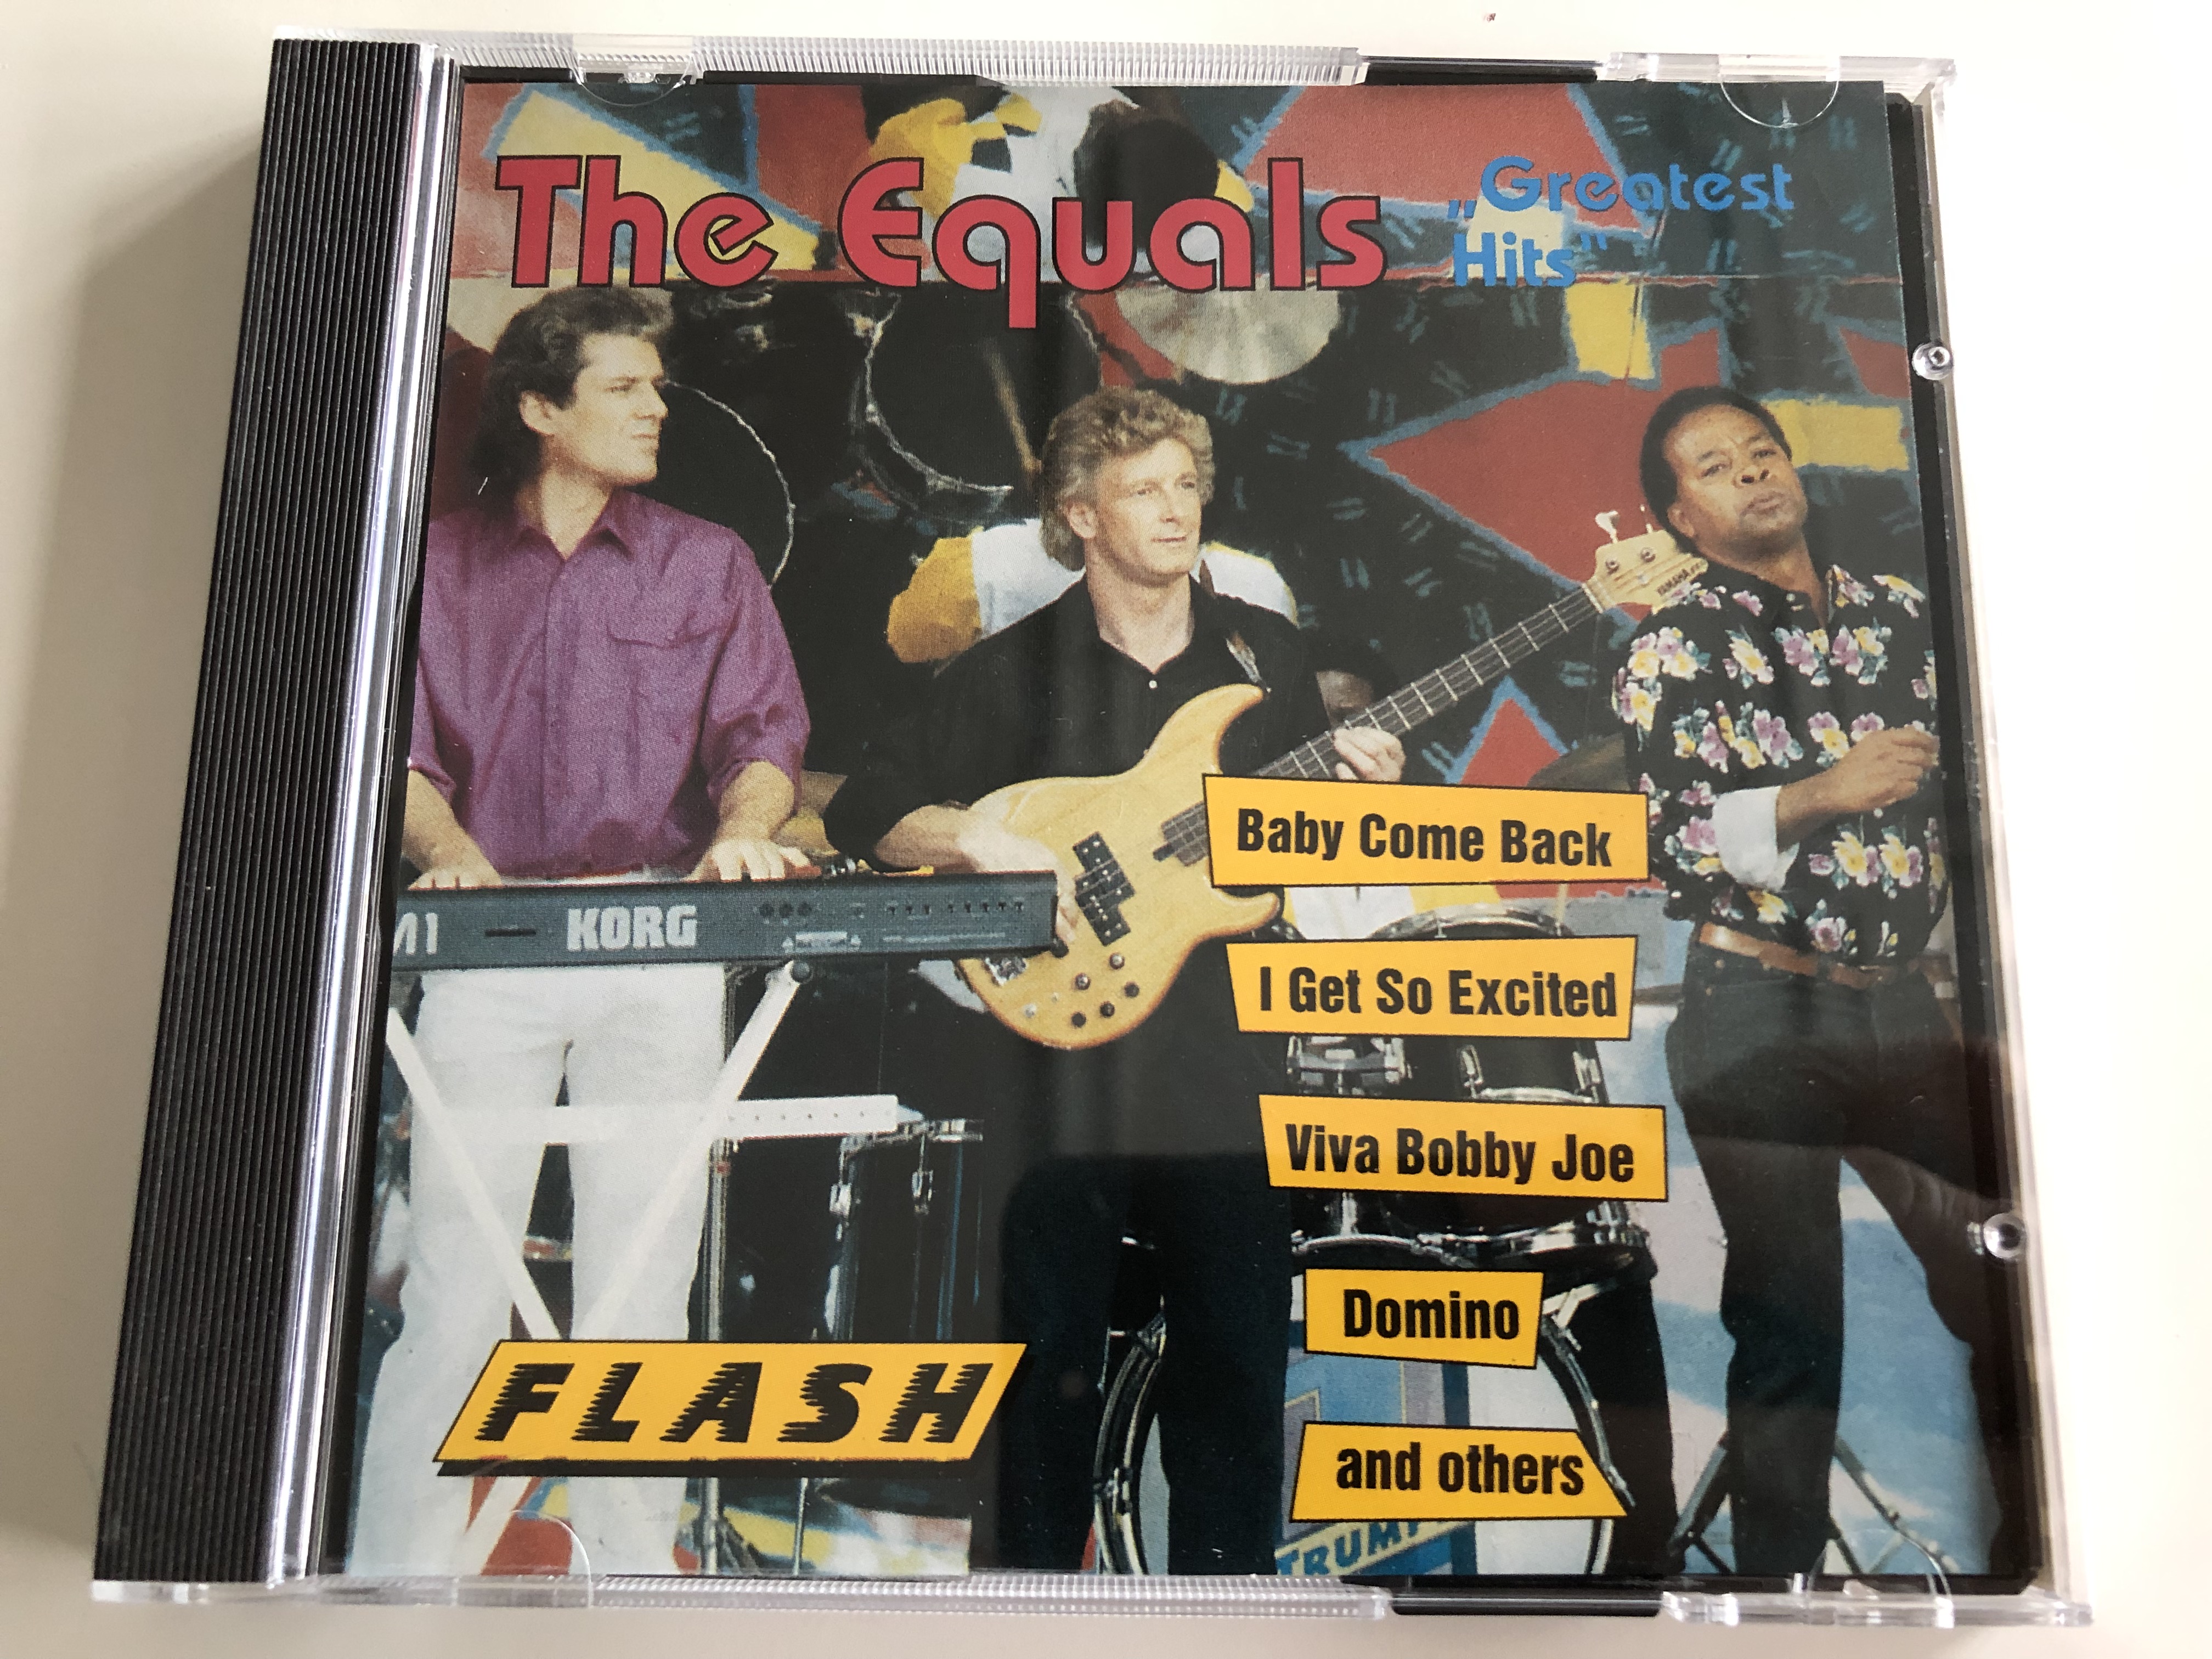 the-equals-greatest-hits-baby-come-back-i-get-so-excite-viva-bobby-joe-domino-and-others-flash-audio-cd-stereo-8353-2-1-.jpg